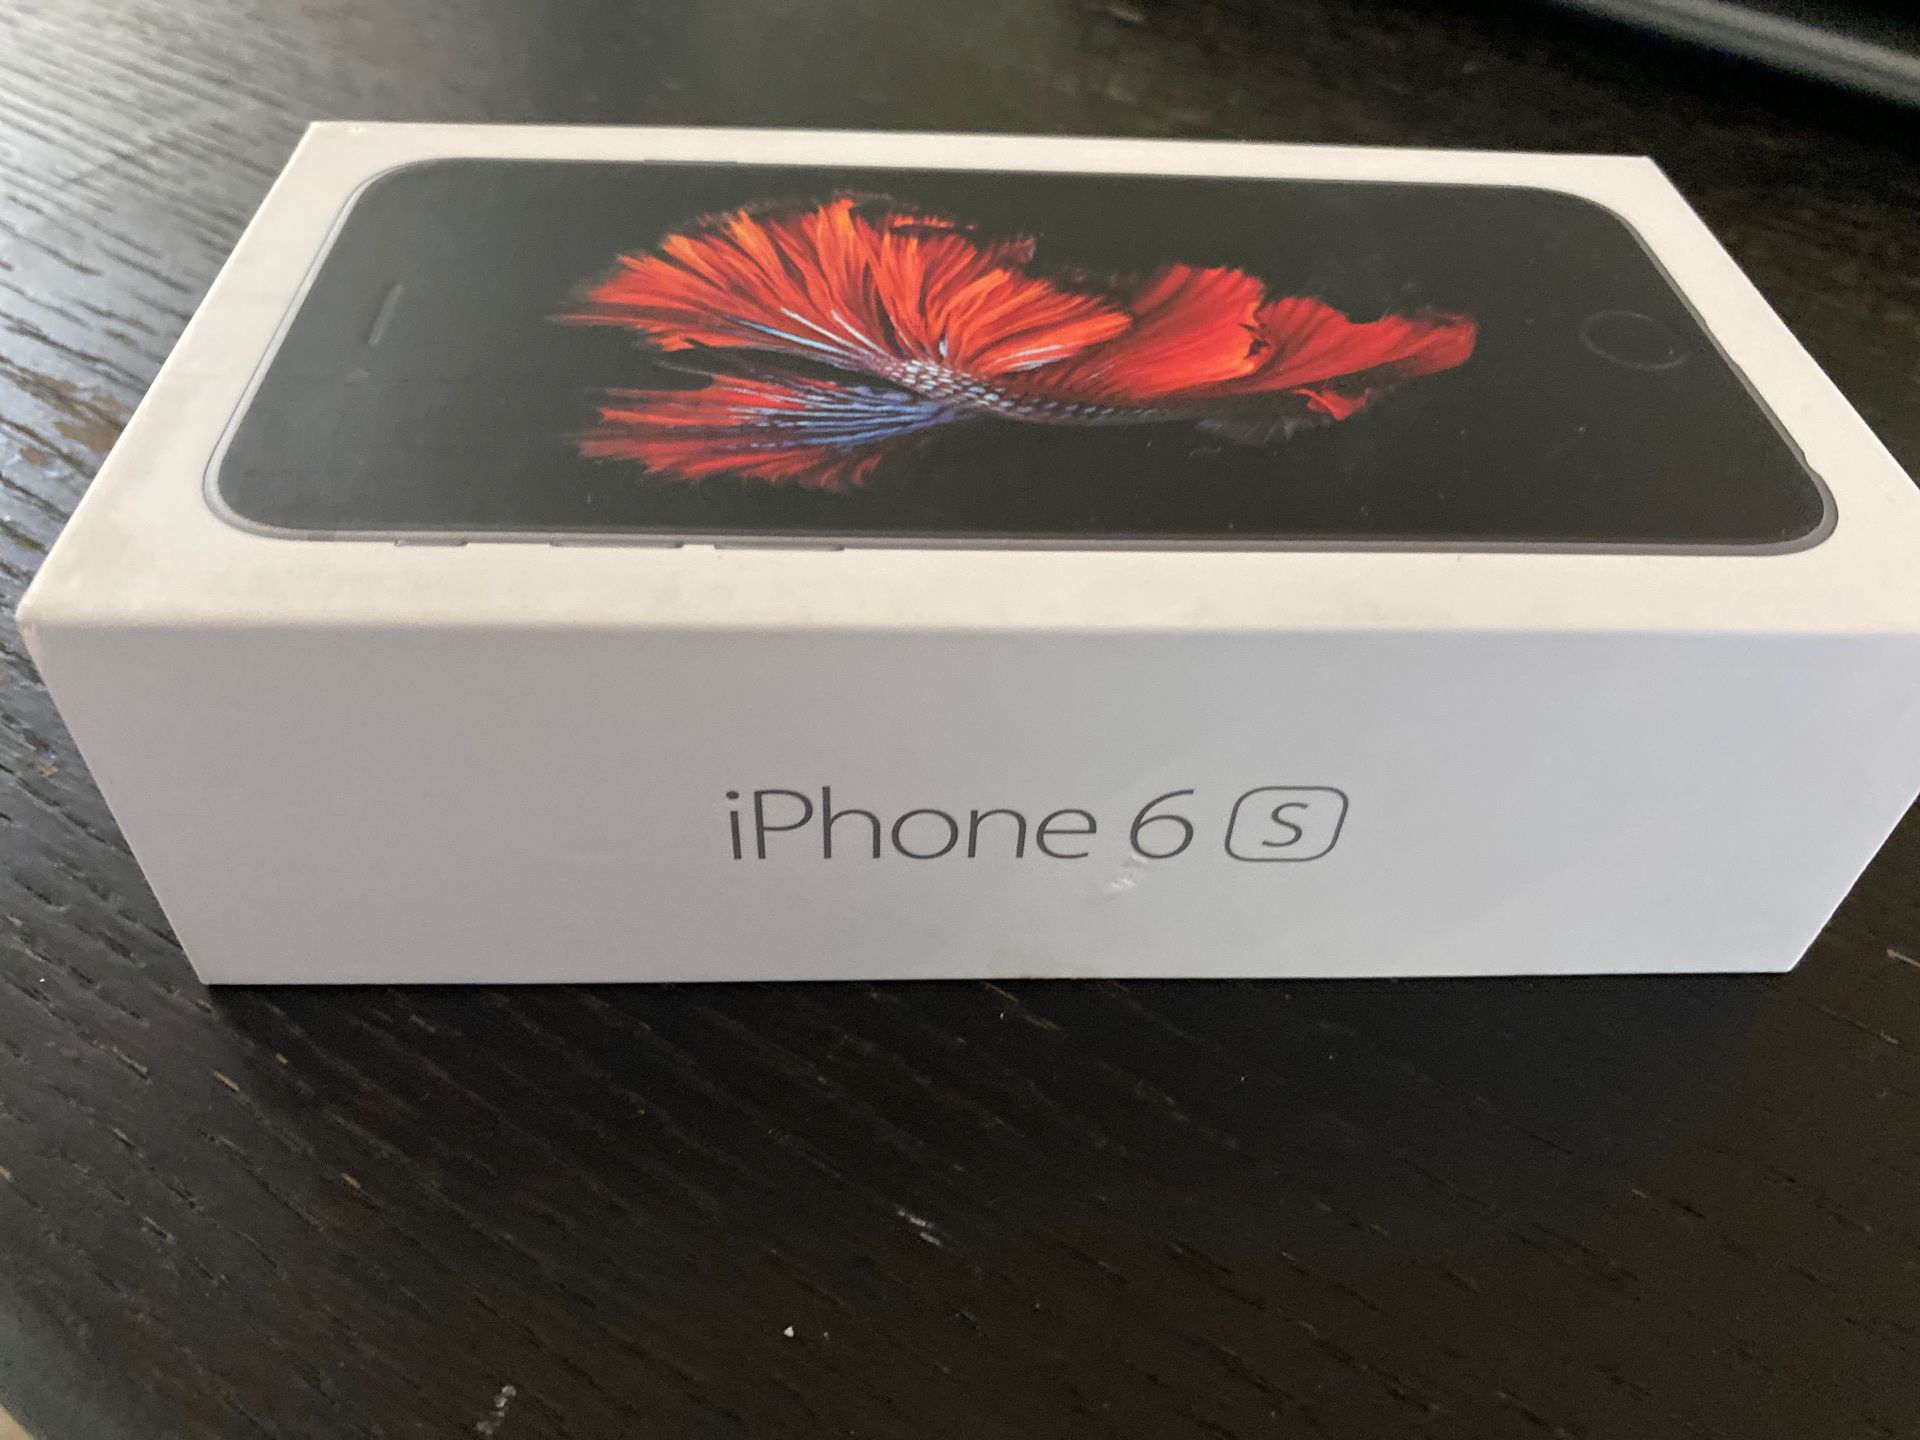 iPhone 6s Tmobile/metropcs 16 GB in great condition comes with original box